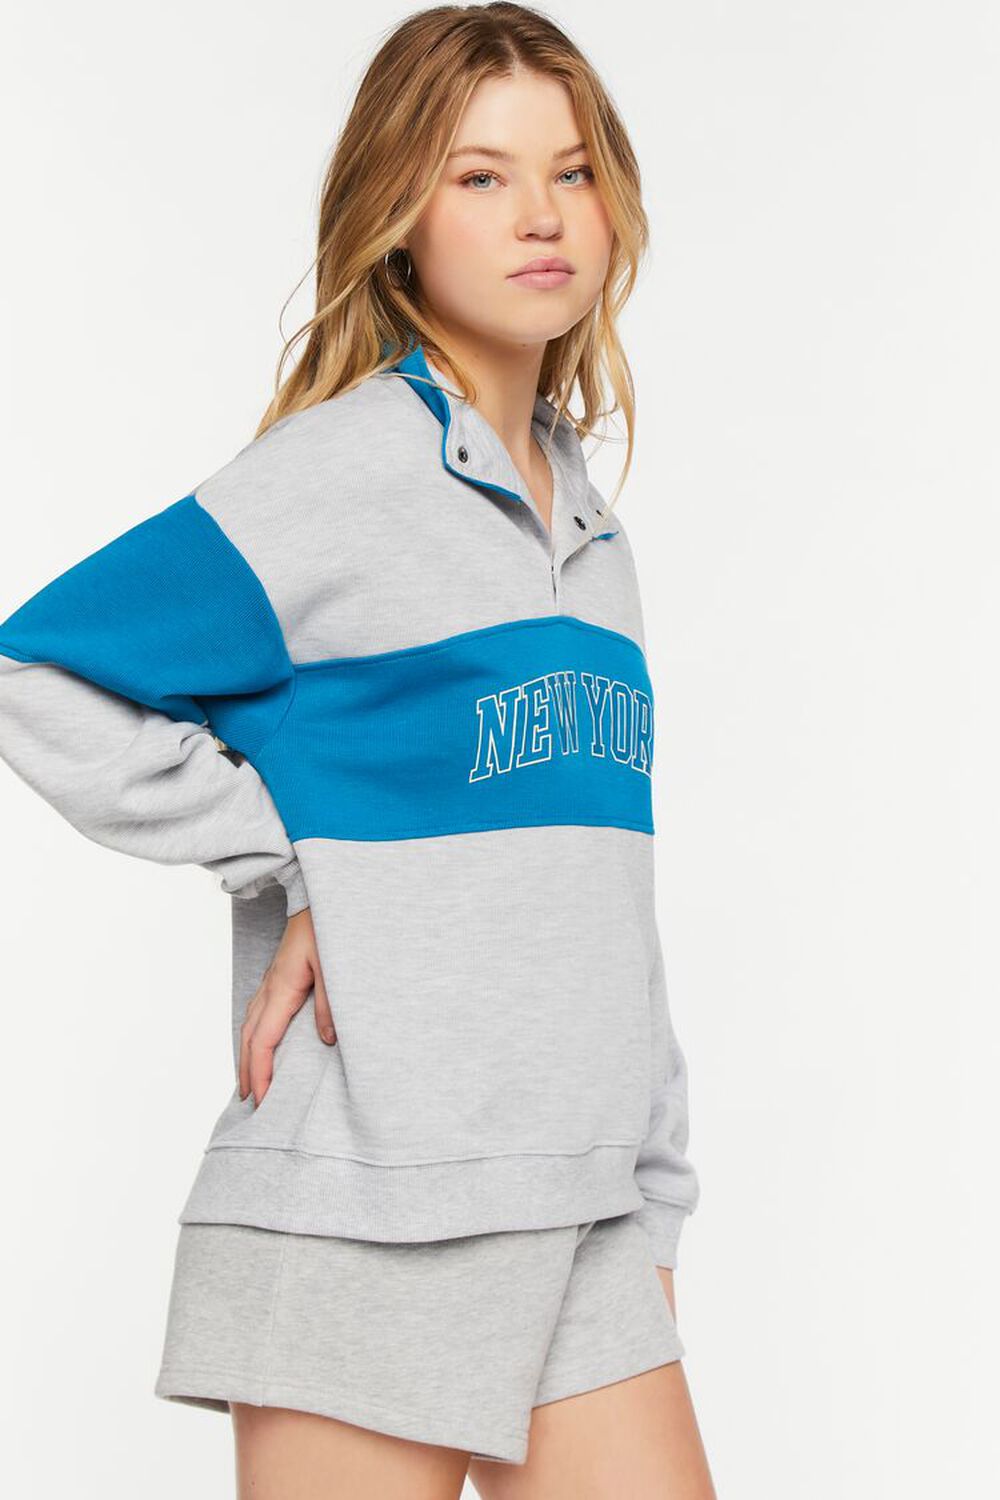 HEATHER GREY/BLUE New York Heathered Graphic Pullover, image 2